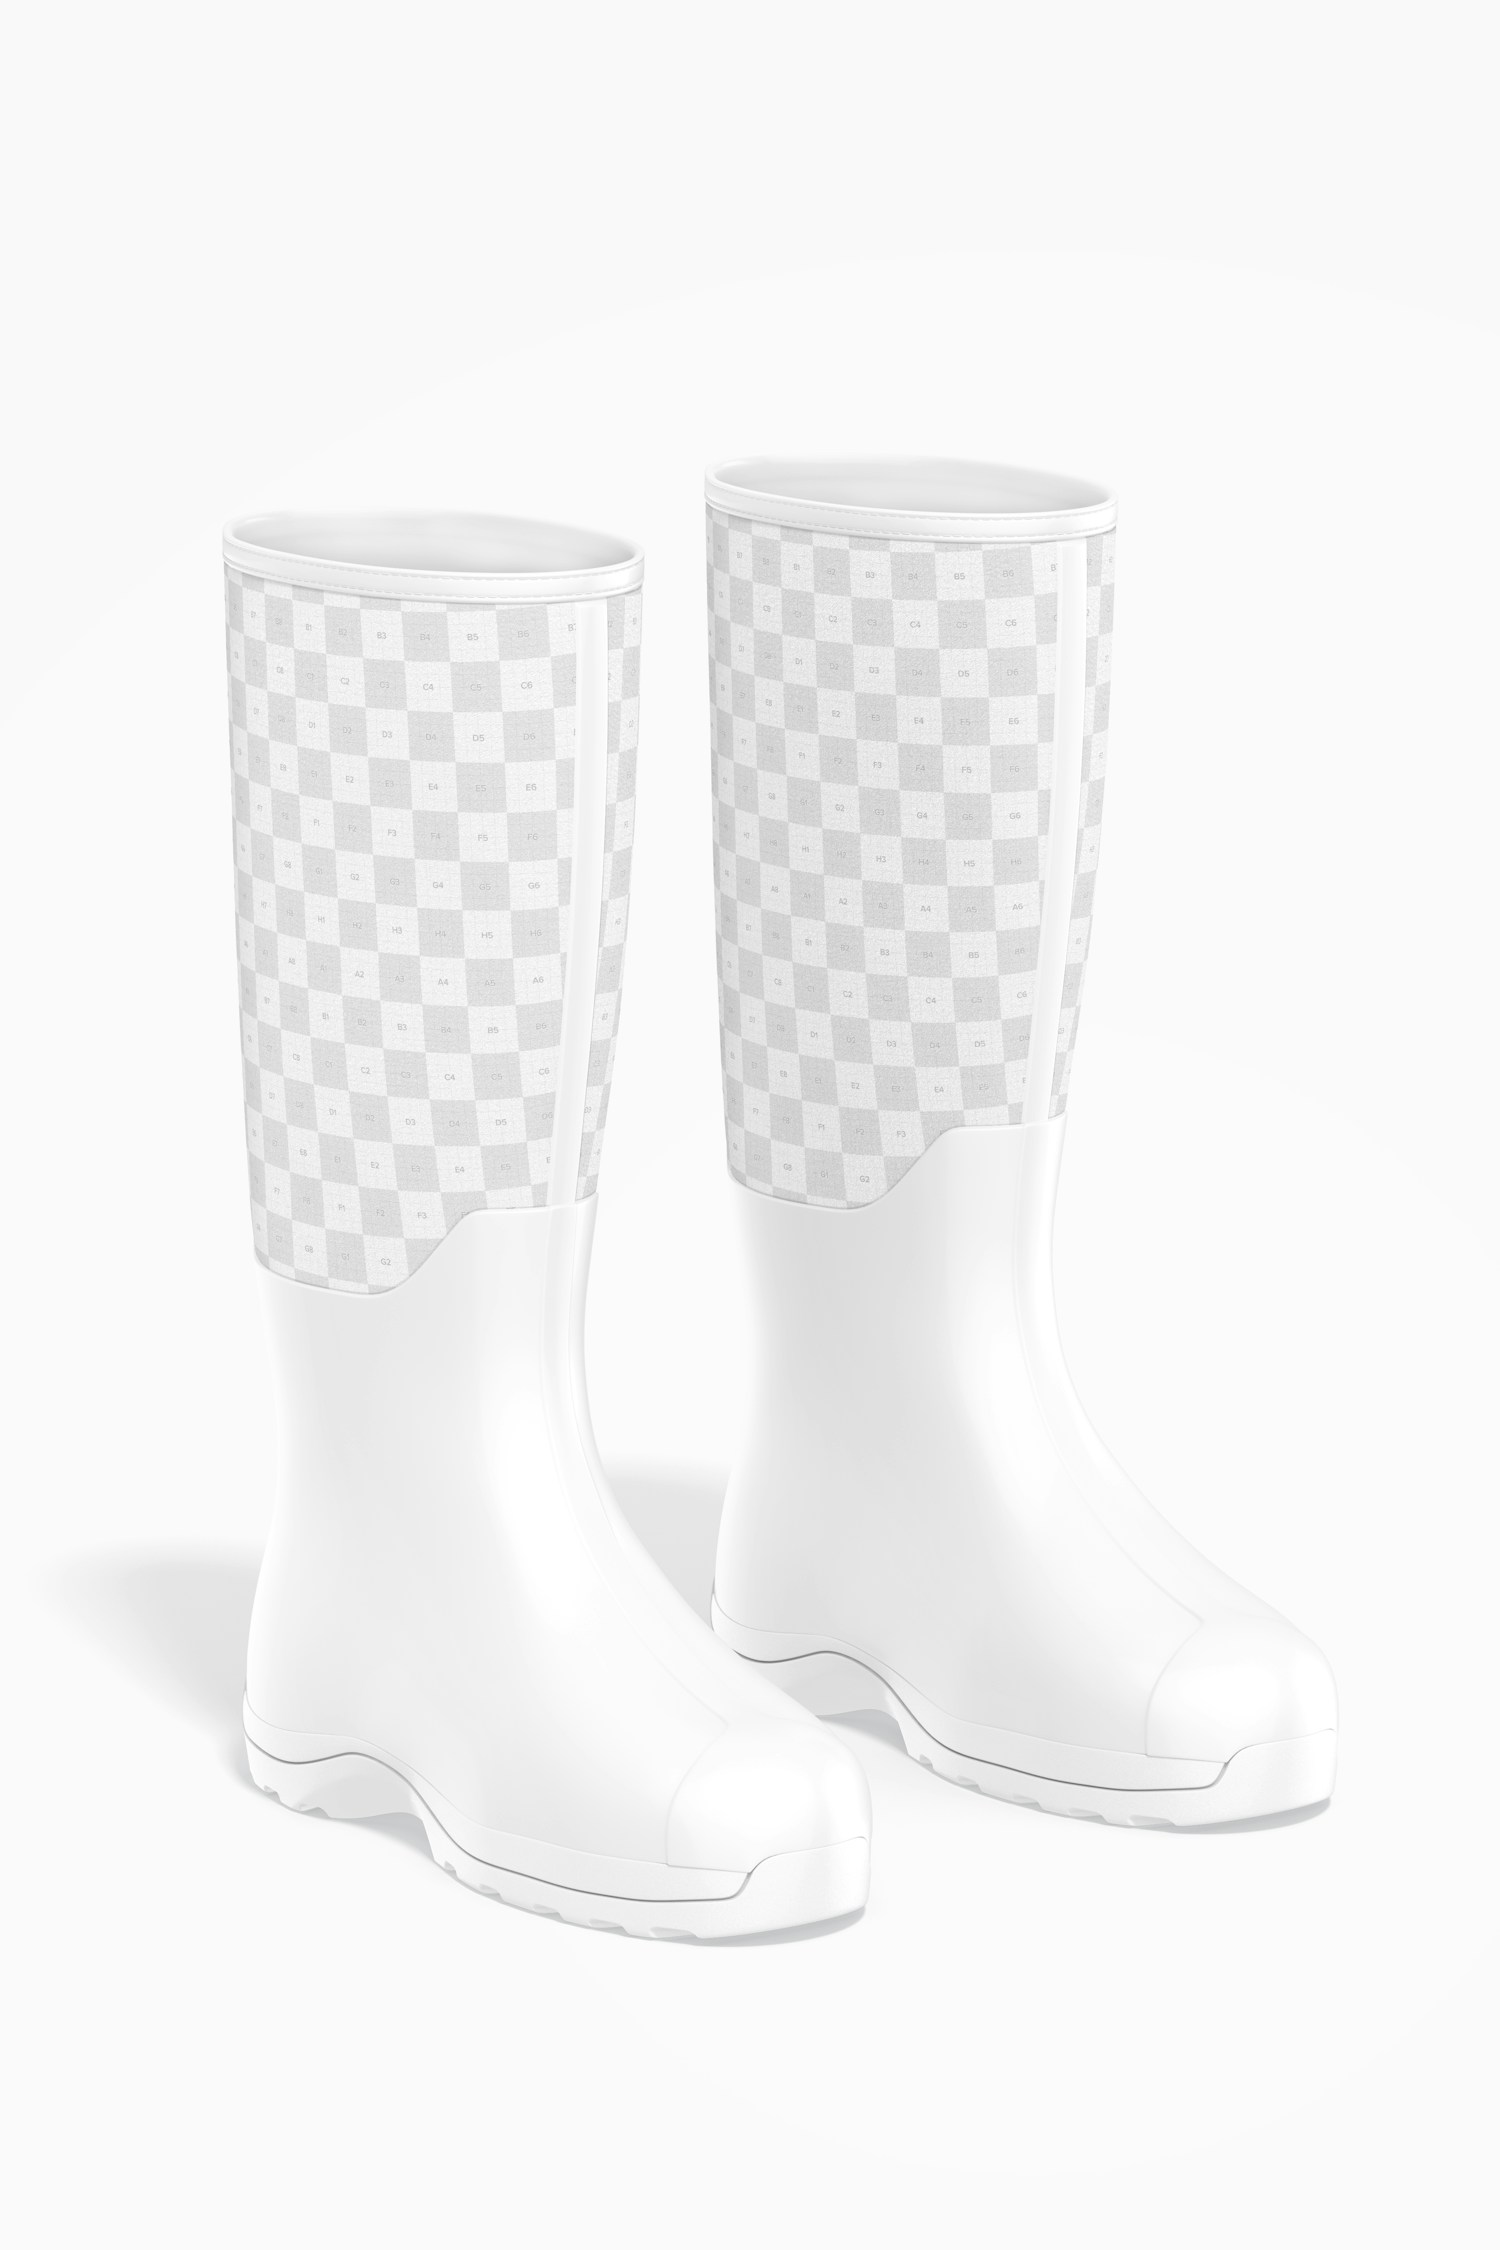 Rubber Boots Mockup